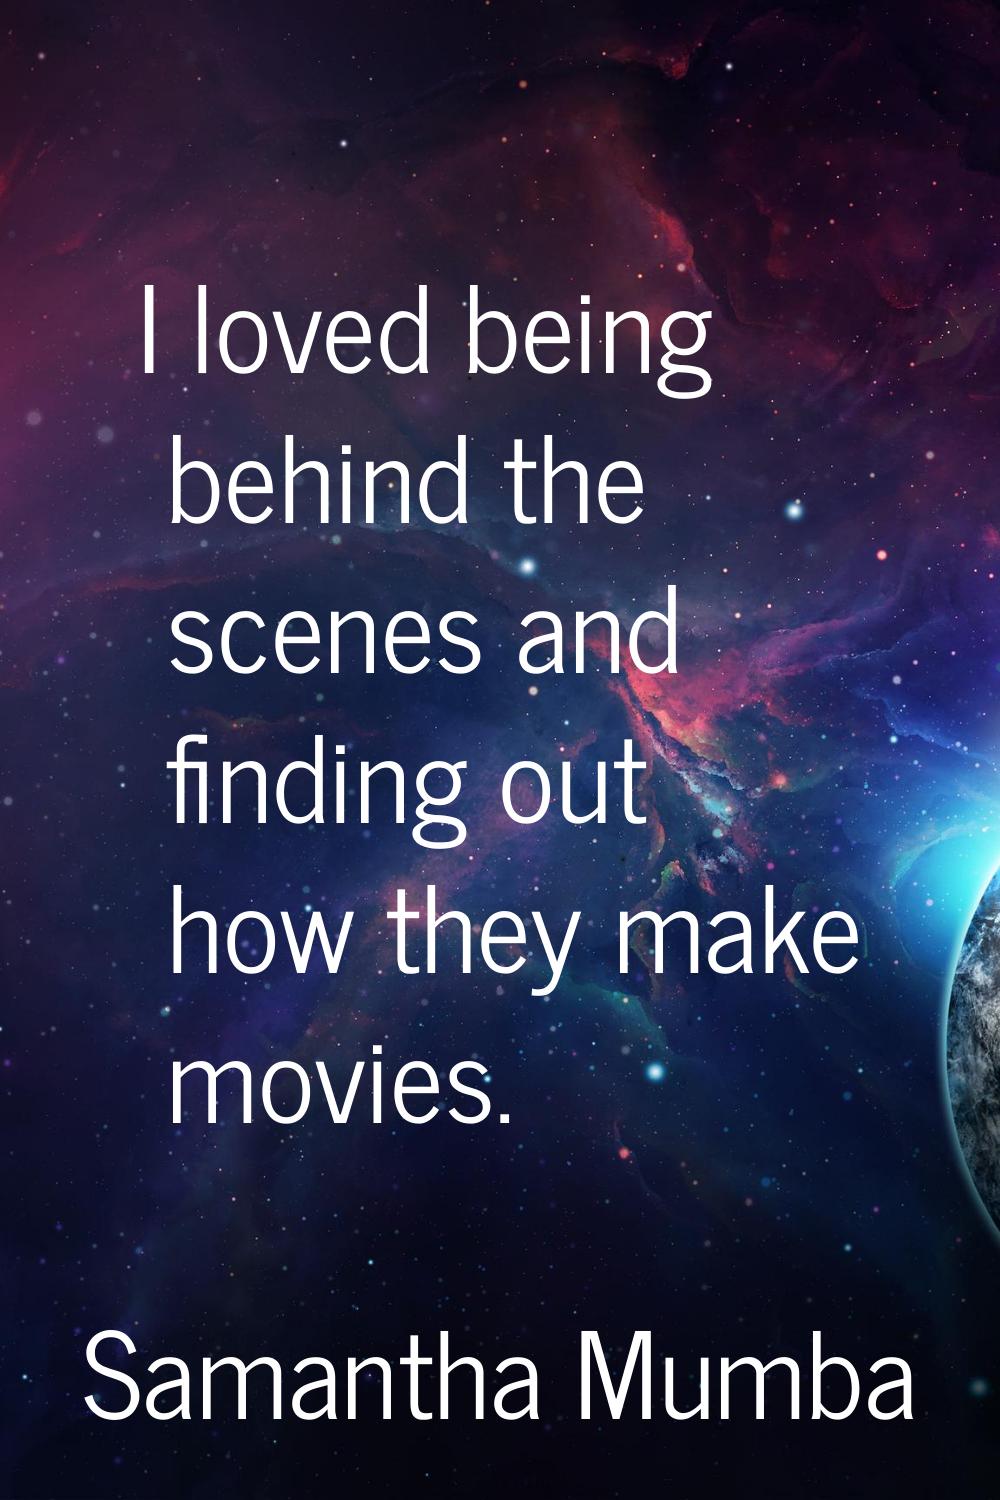 I loved being behind the scenes and finding out how they make movies.